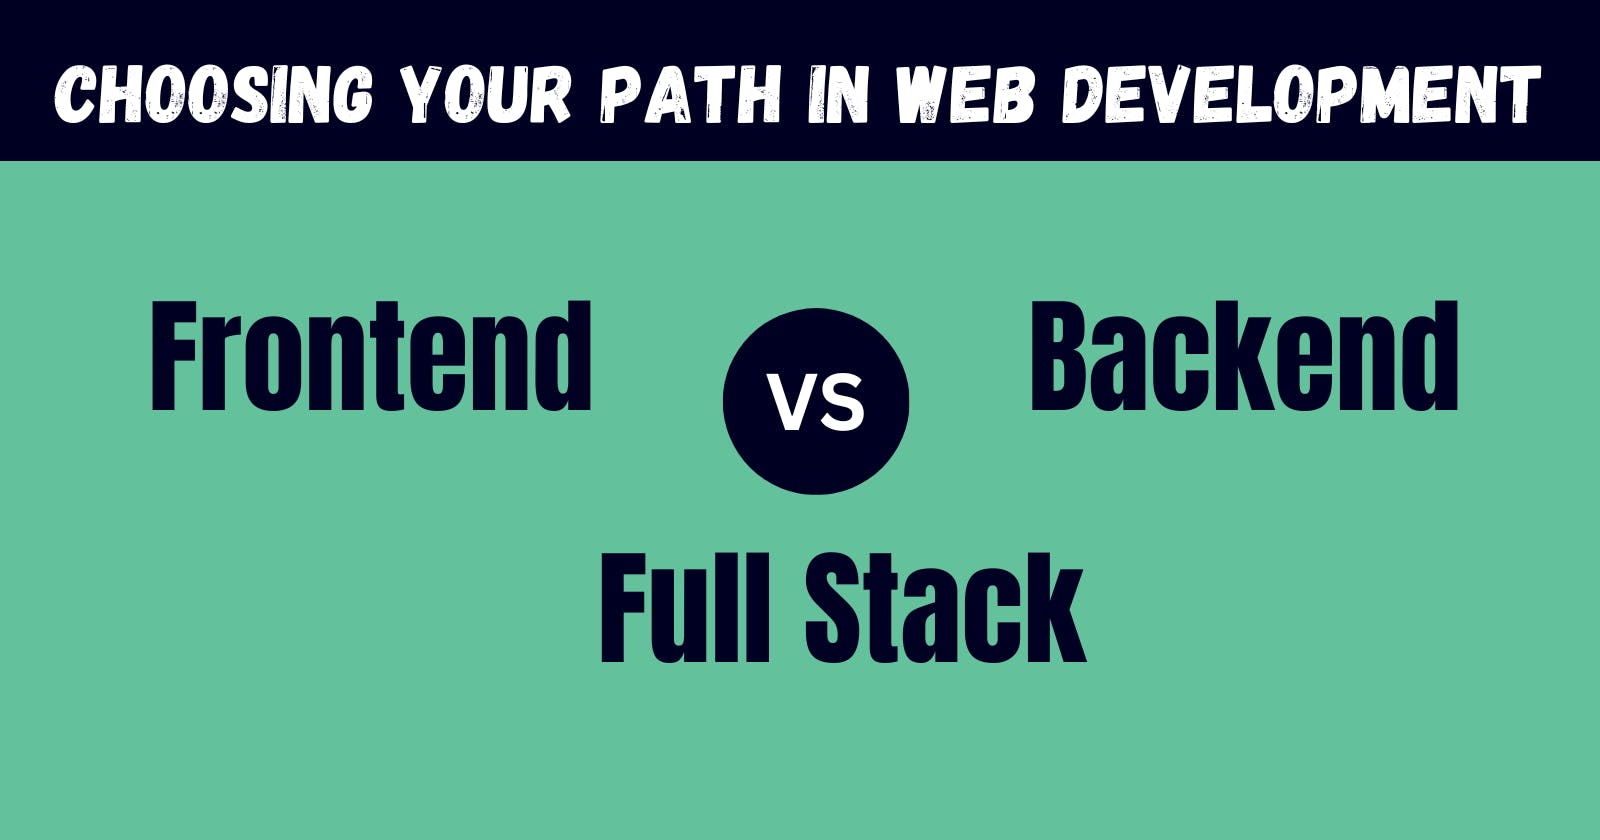 Choosing Your Path in Web Development: Frontend vs. Backend vs. Full Stack